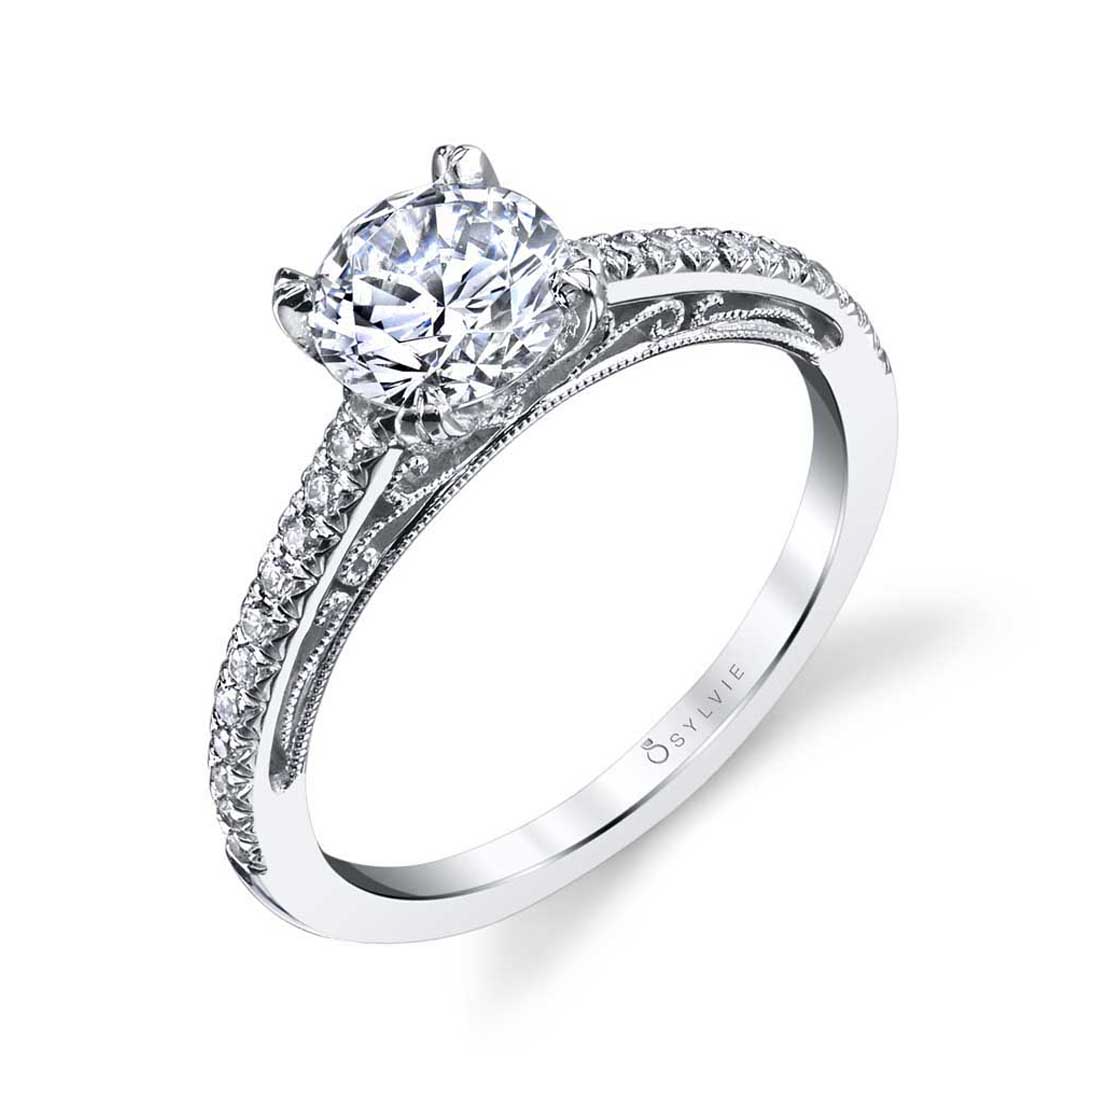 Solitaire Engagement Ring - Edwin Novel Jewelry Design